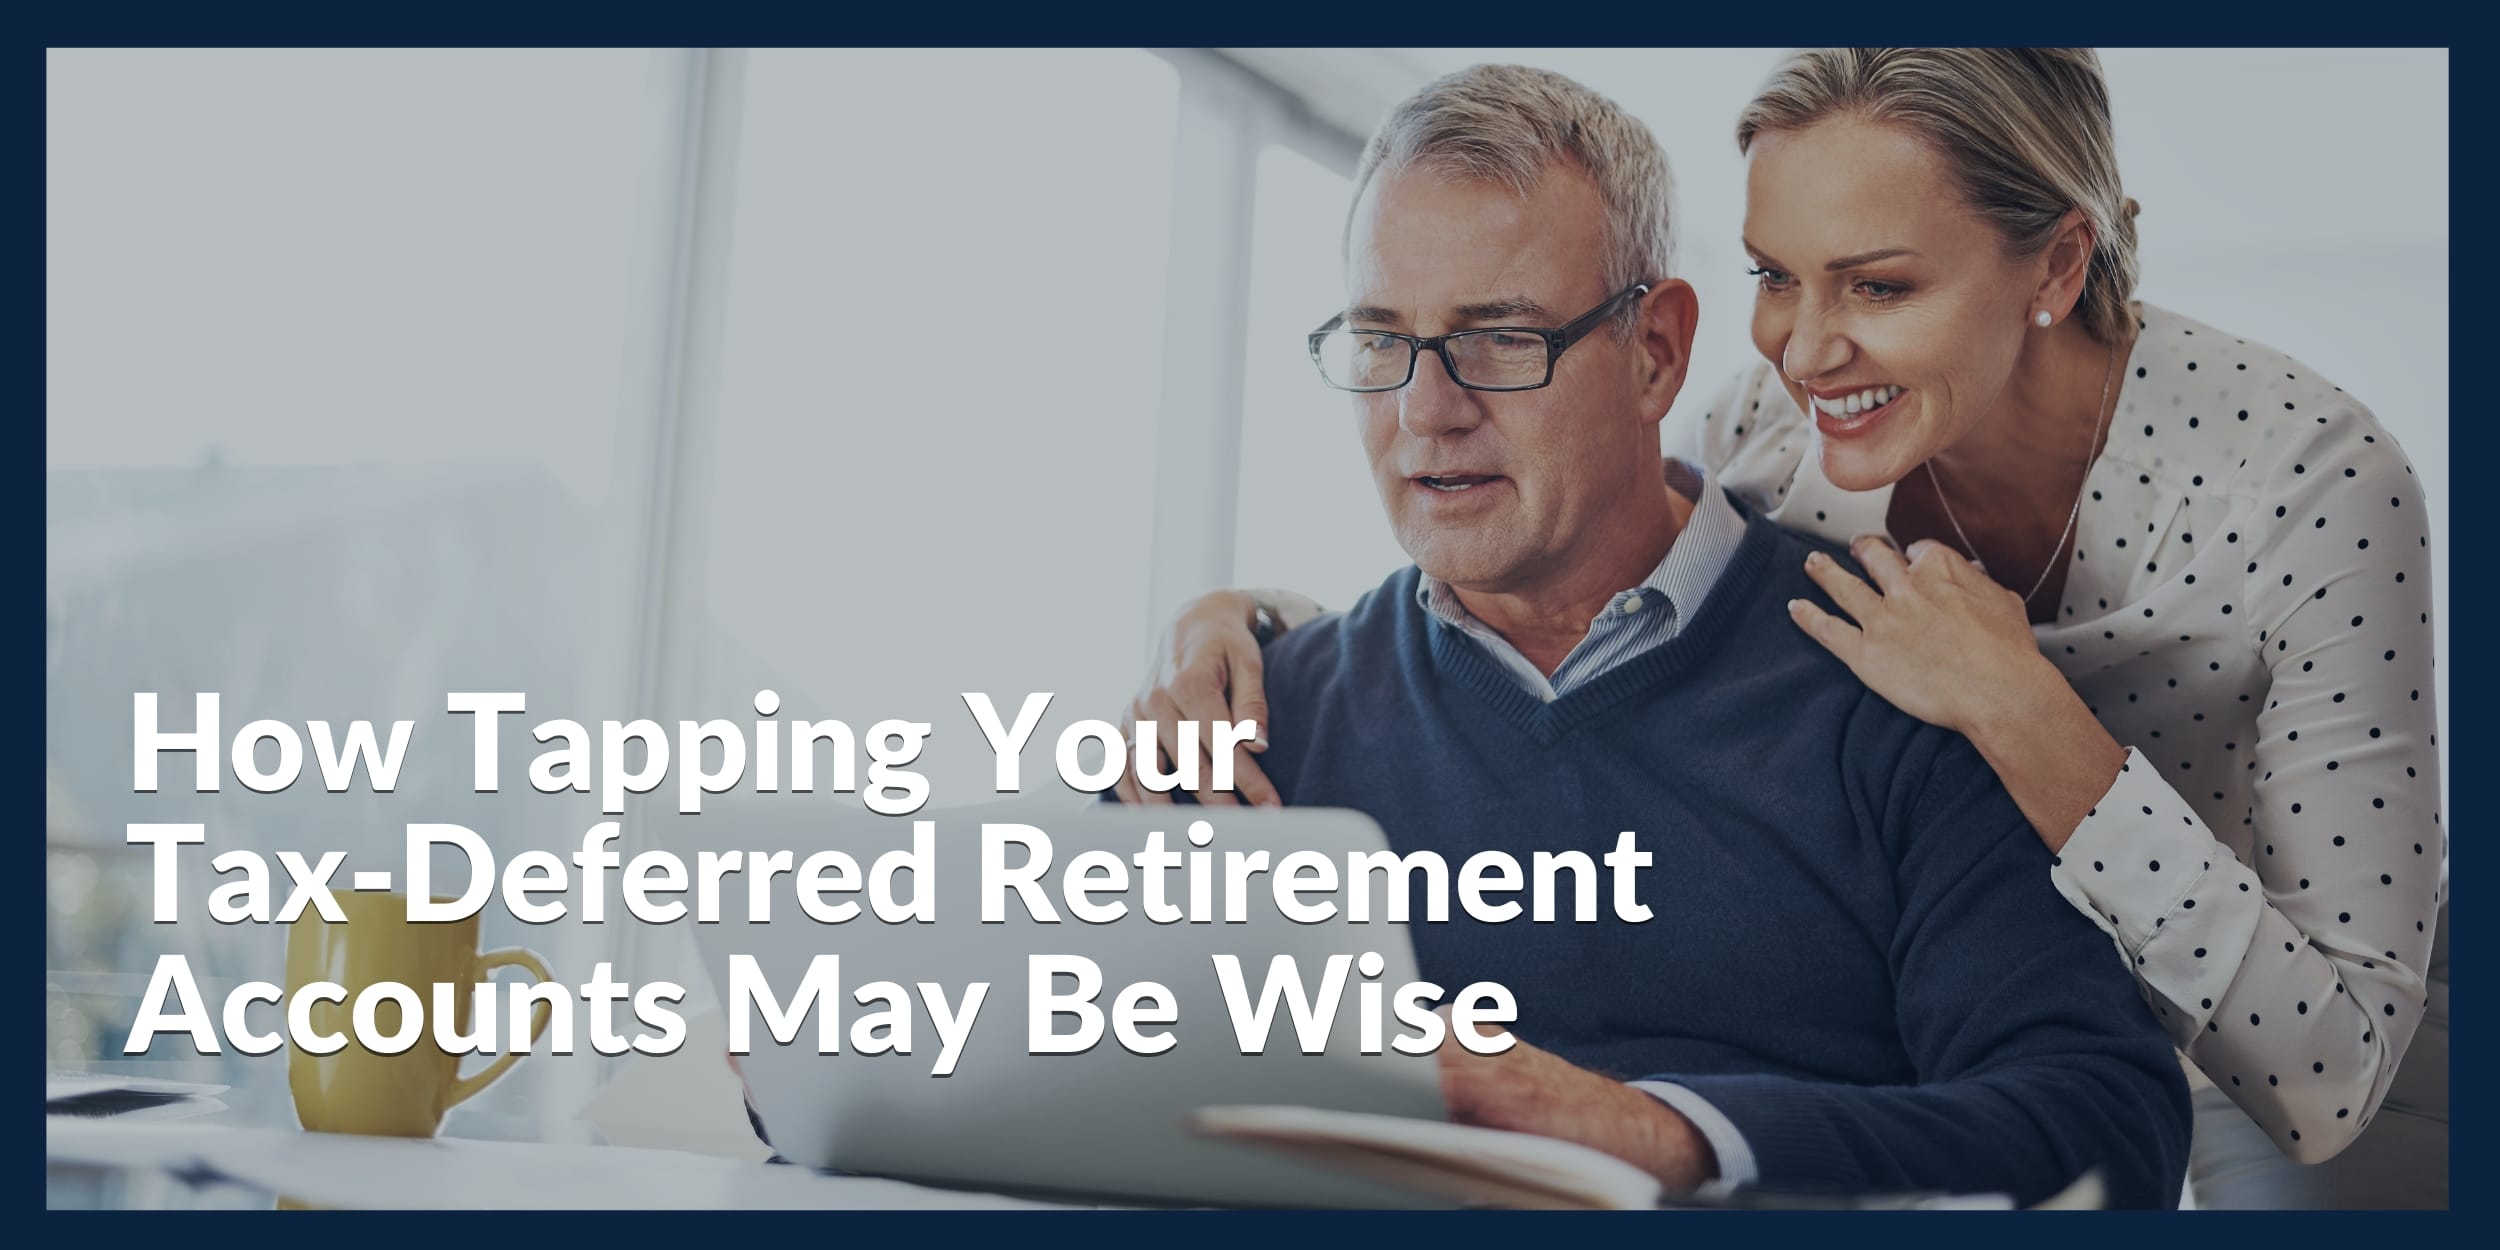 How Tapping Your Tax-Deferred Retirement Accounts May Be Wise